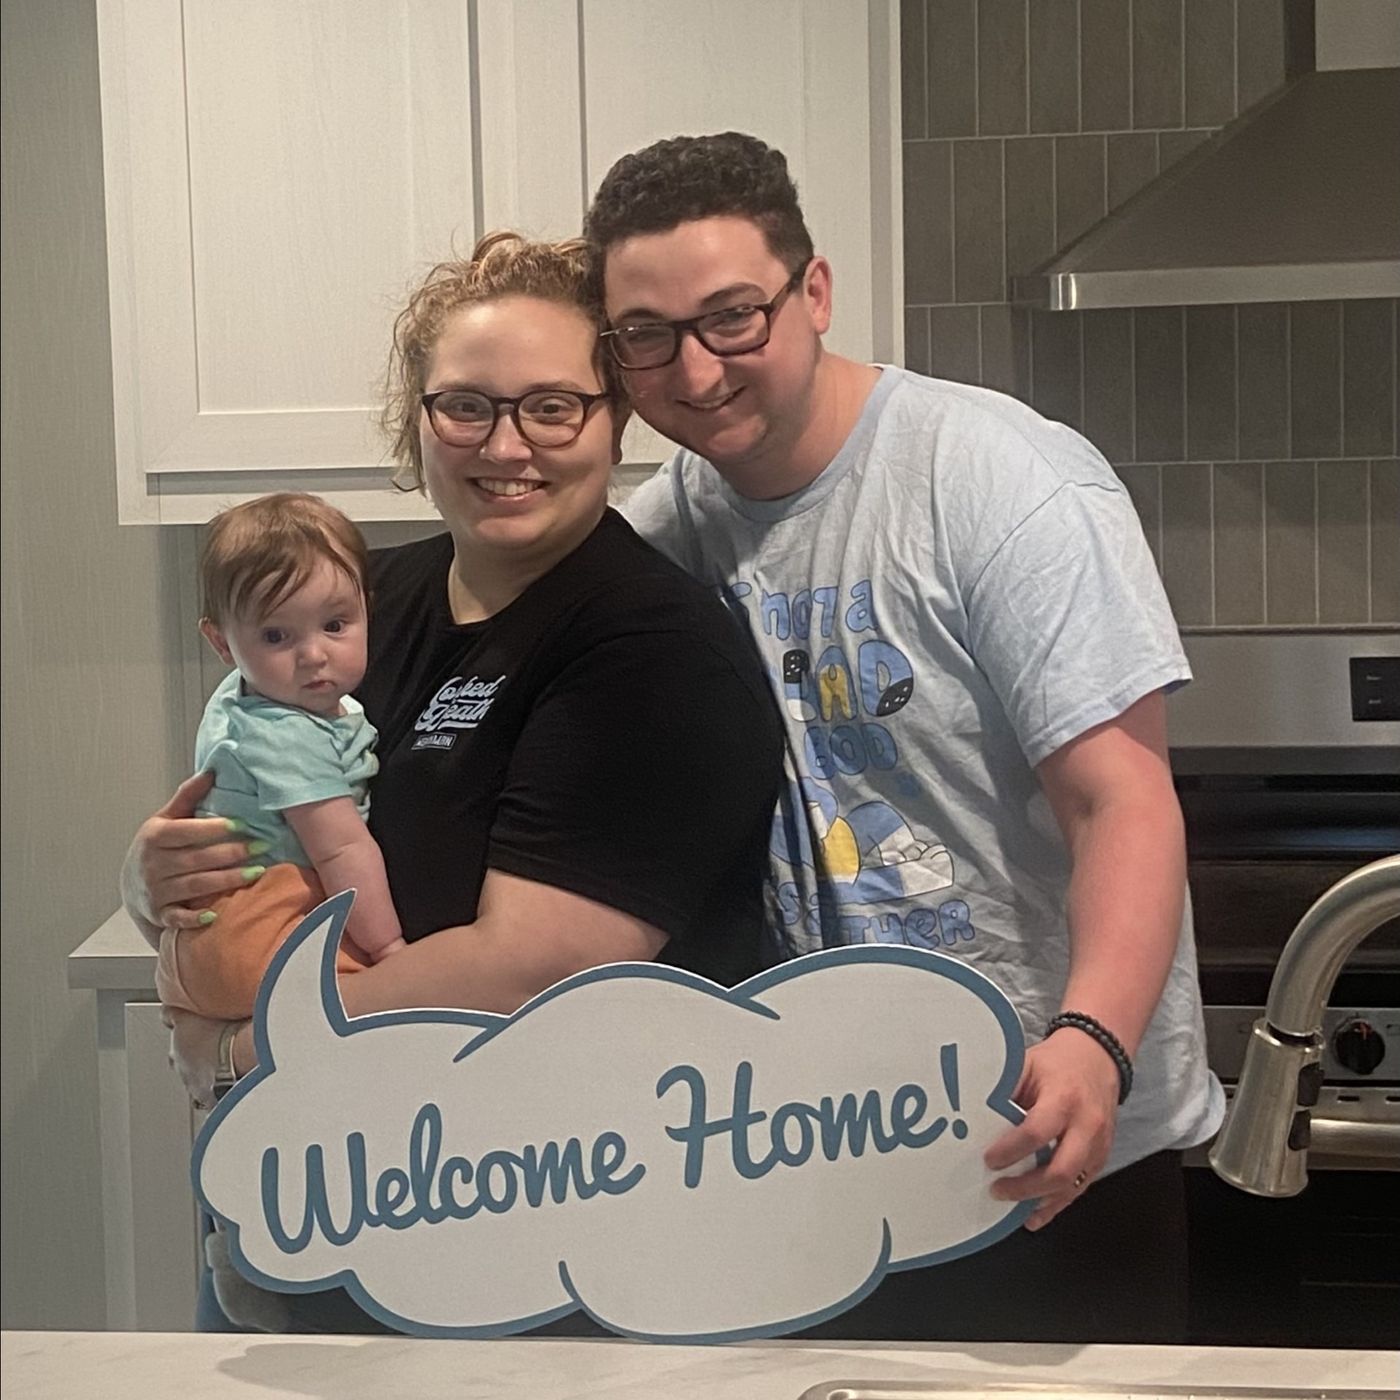 Haylie P. welcome home image